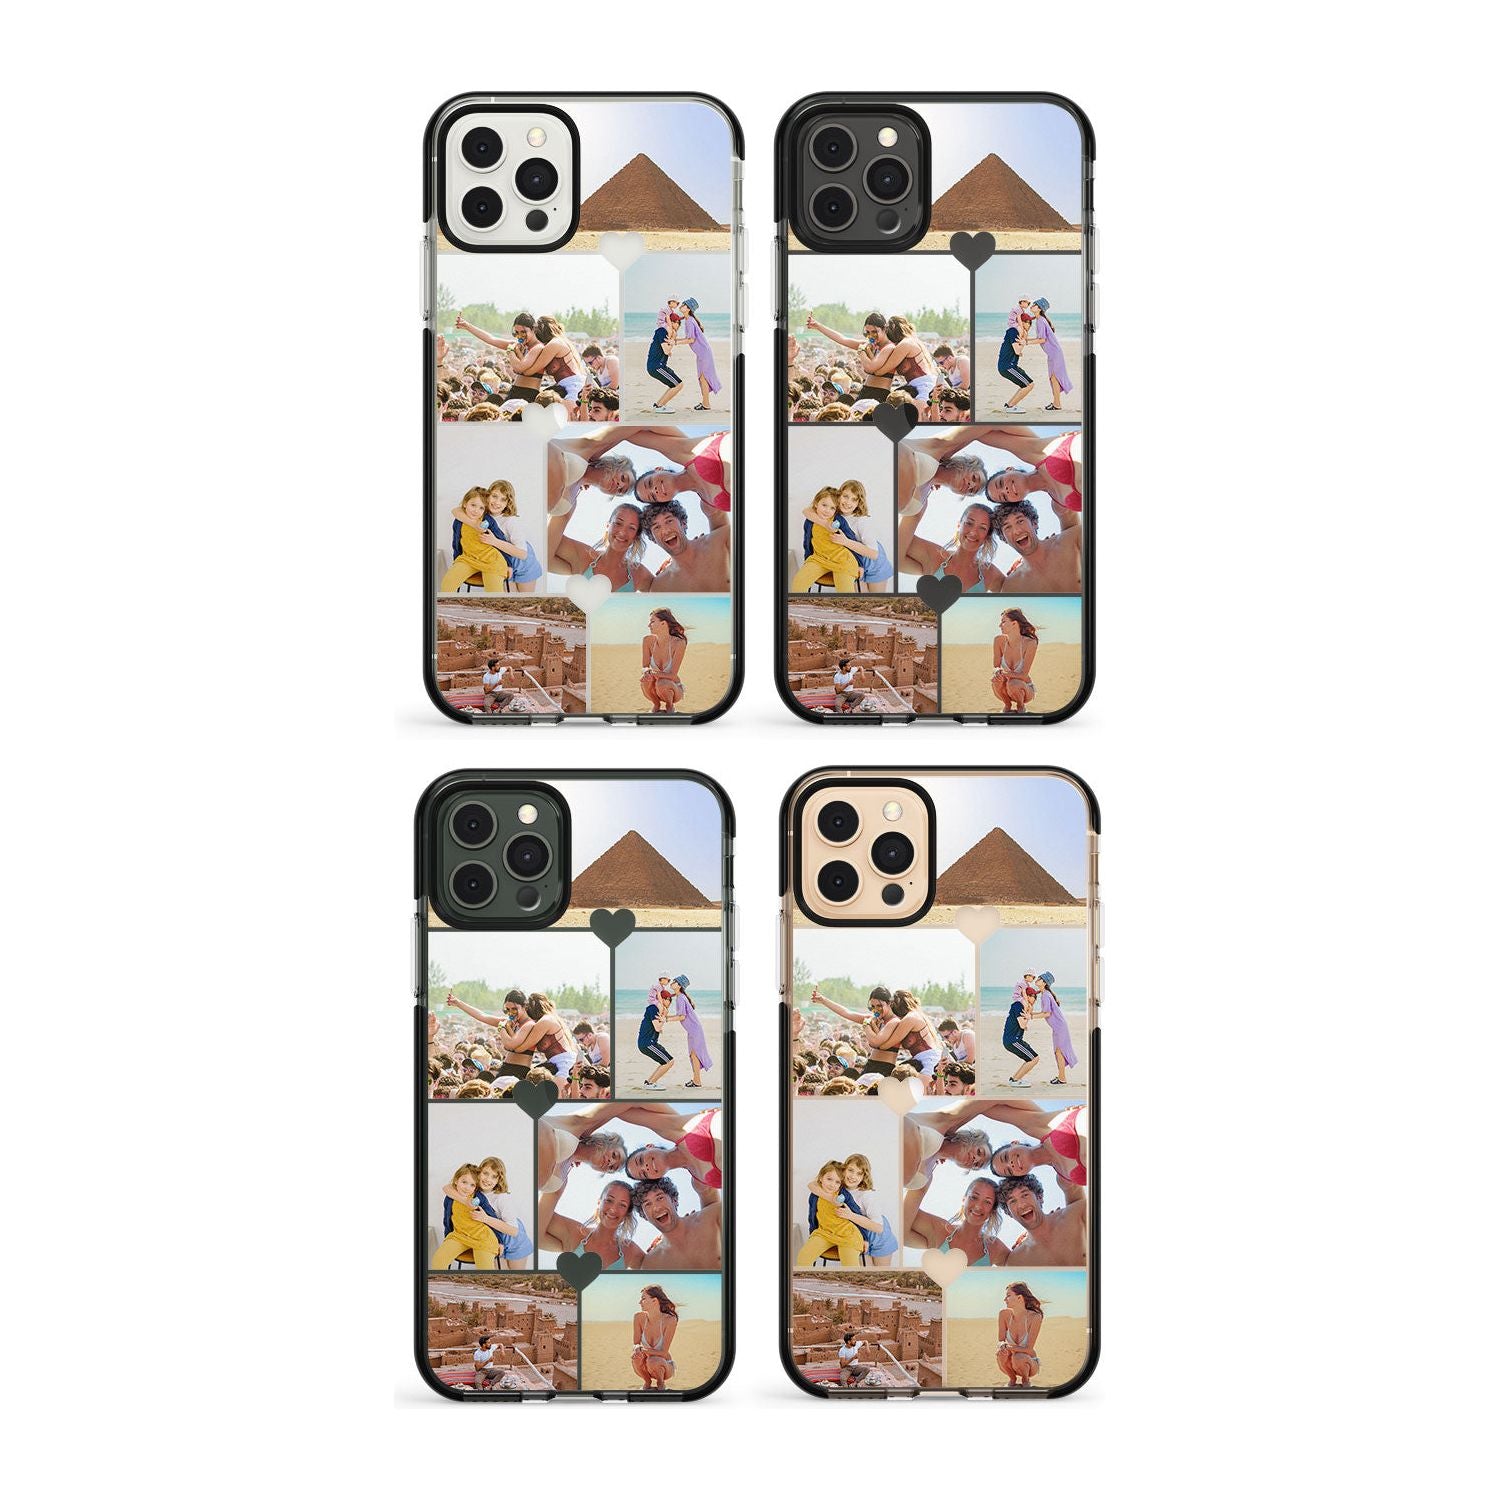 Personalised Heart Photo Grid Impact Phone Case for iPhone 11, iphone 12